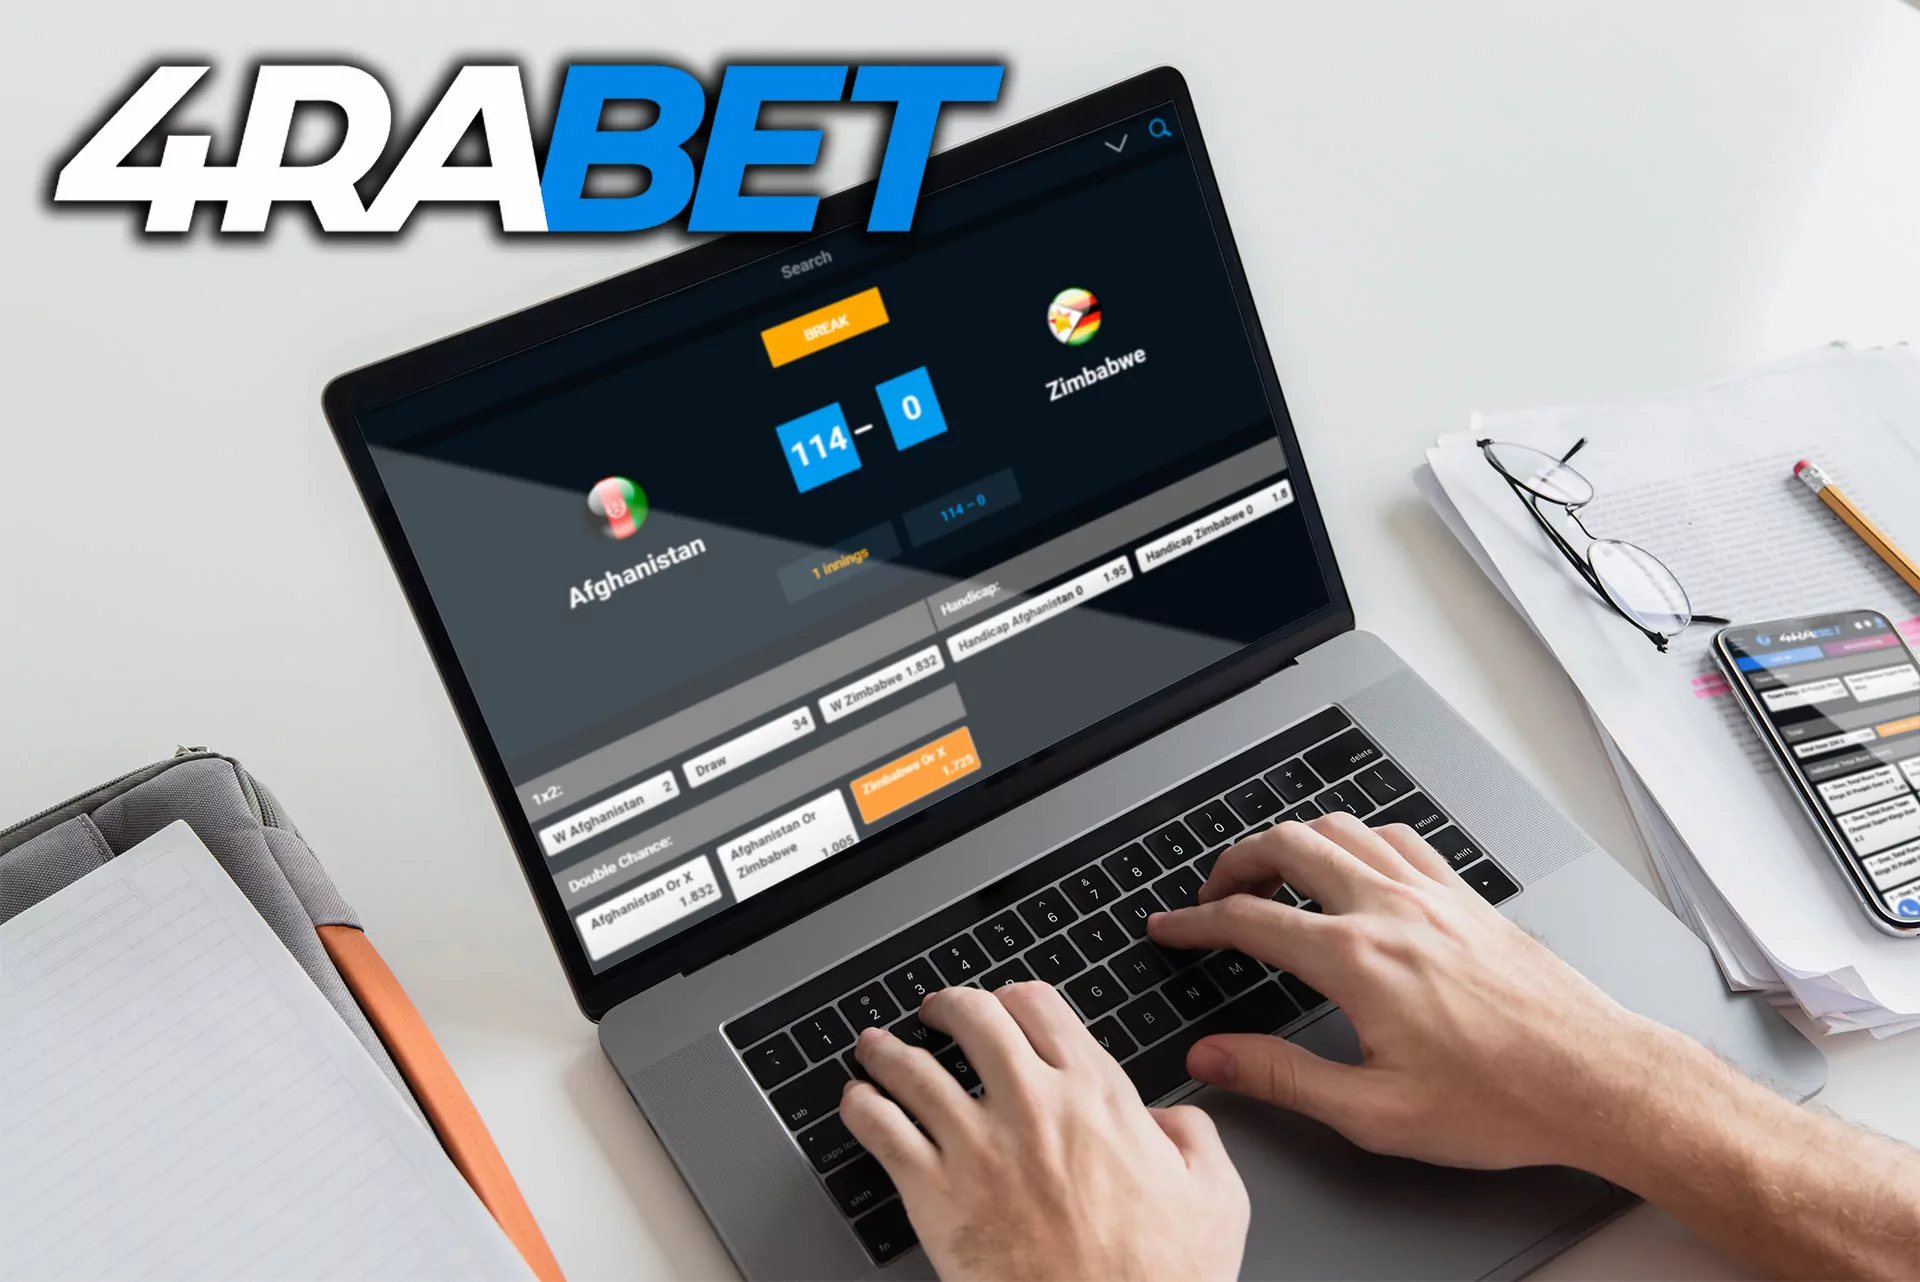 Online cricket betting with 4rabet gives pleasure to all Bangladeshi players.